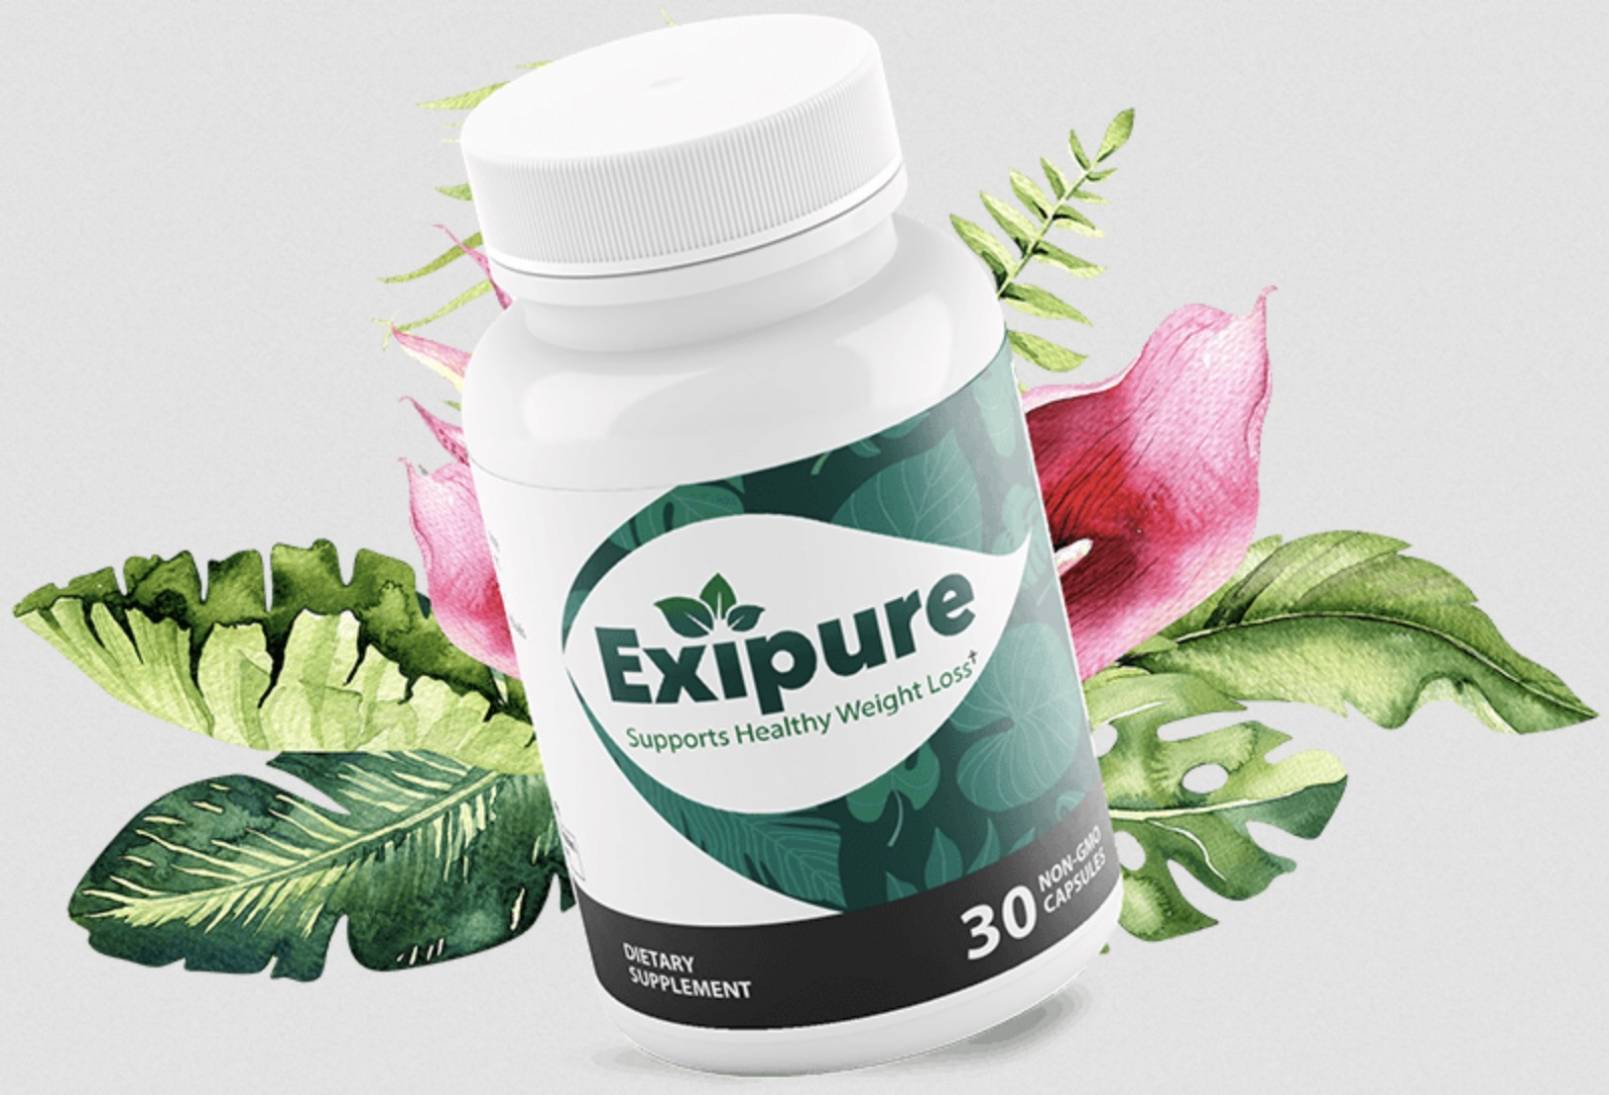 Exipure Promotional Code